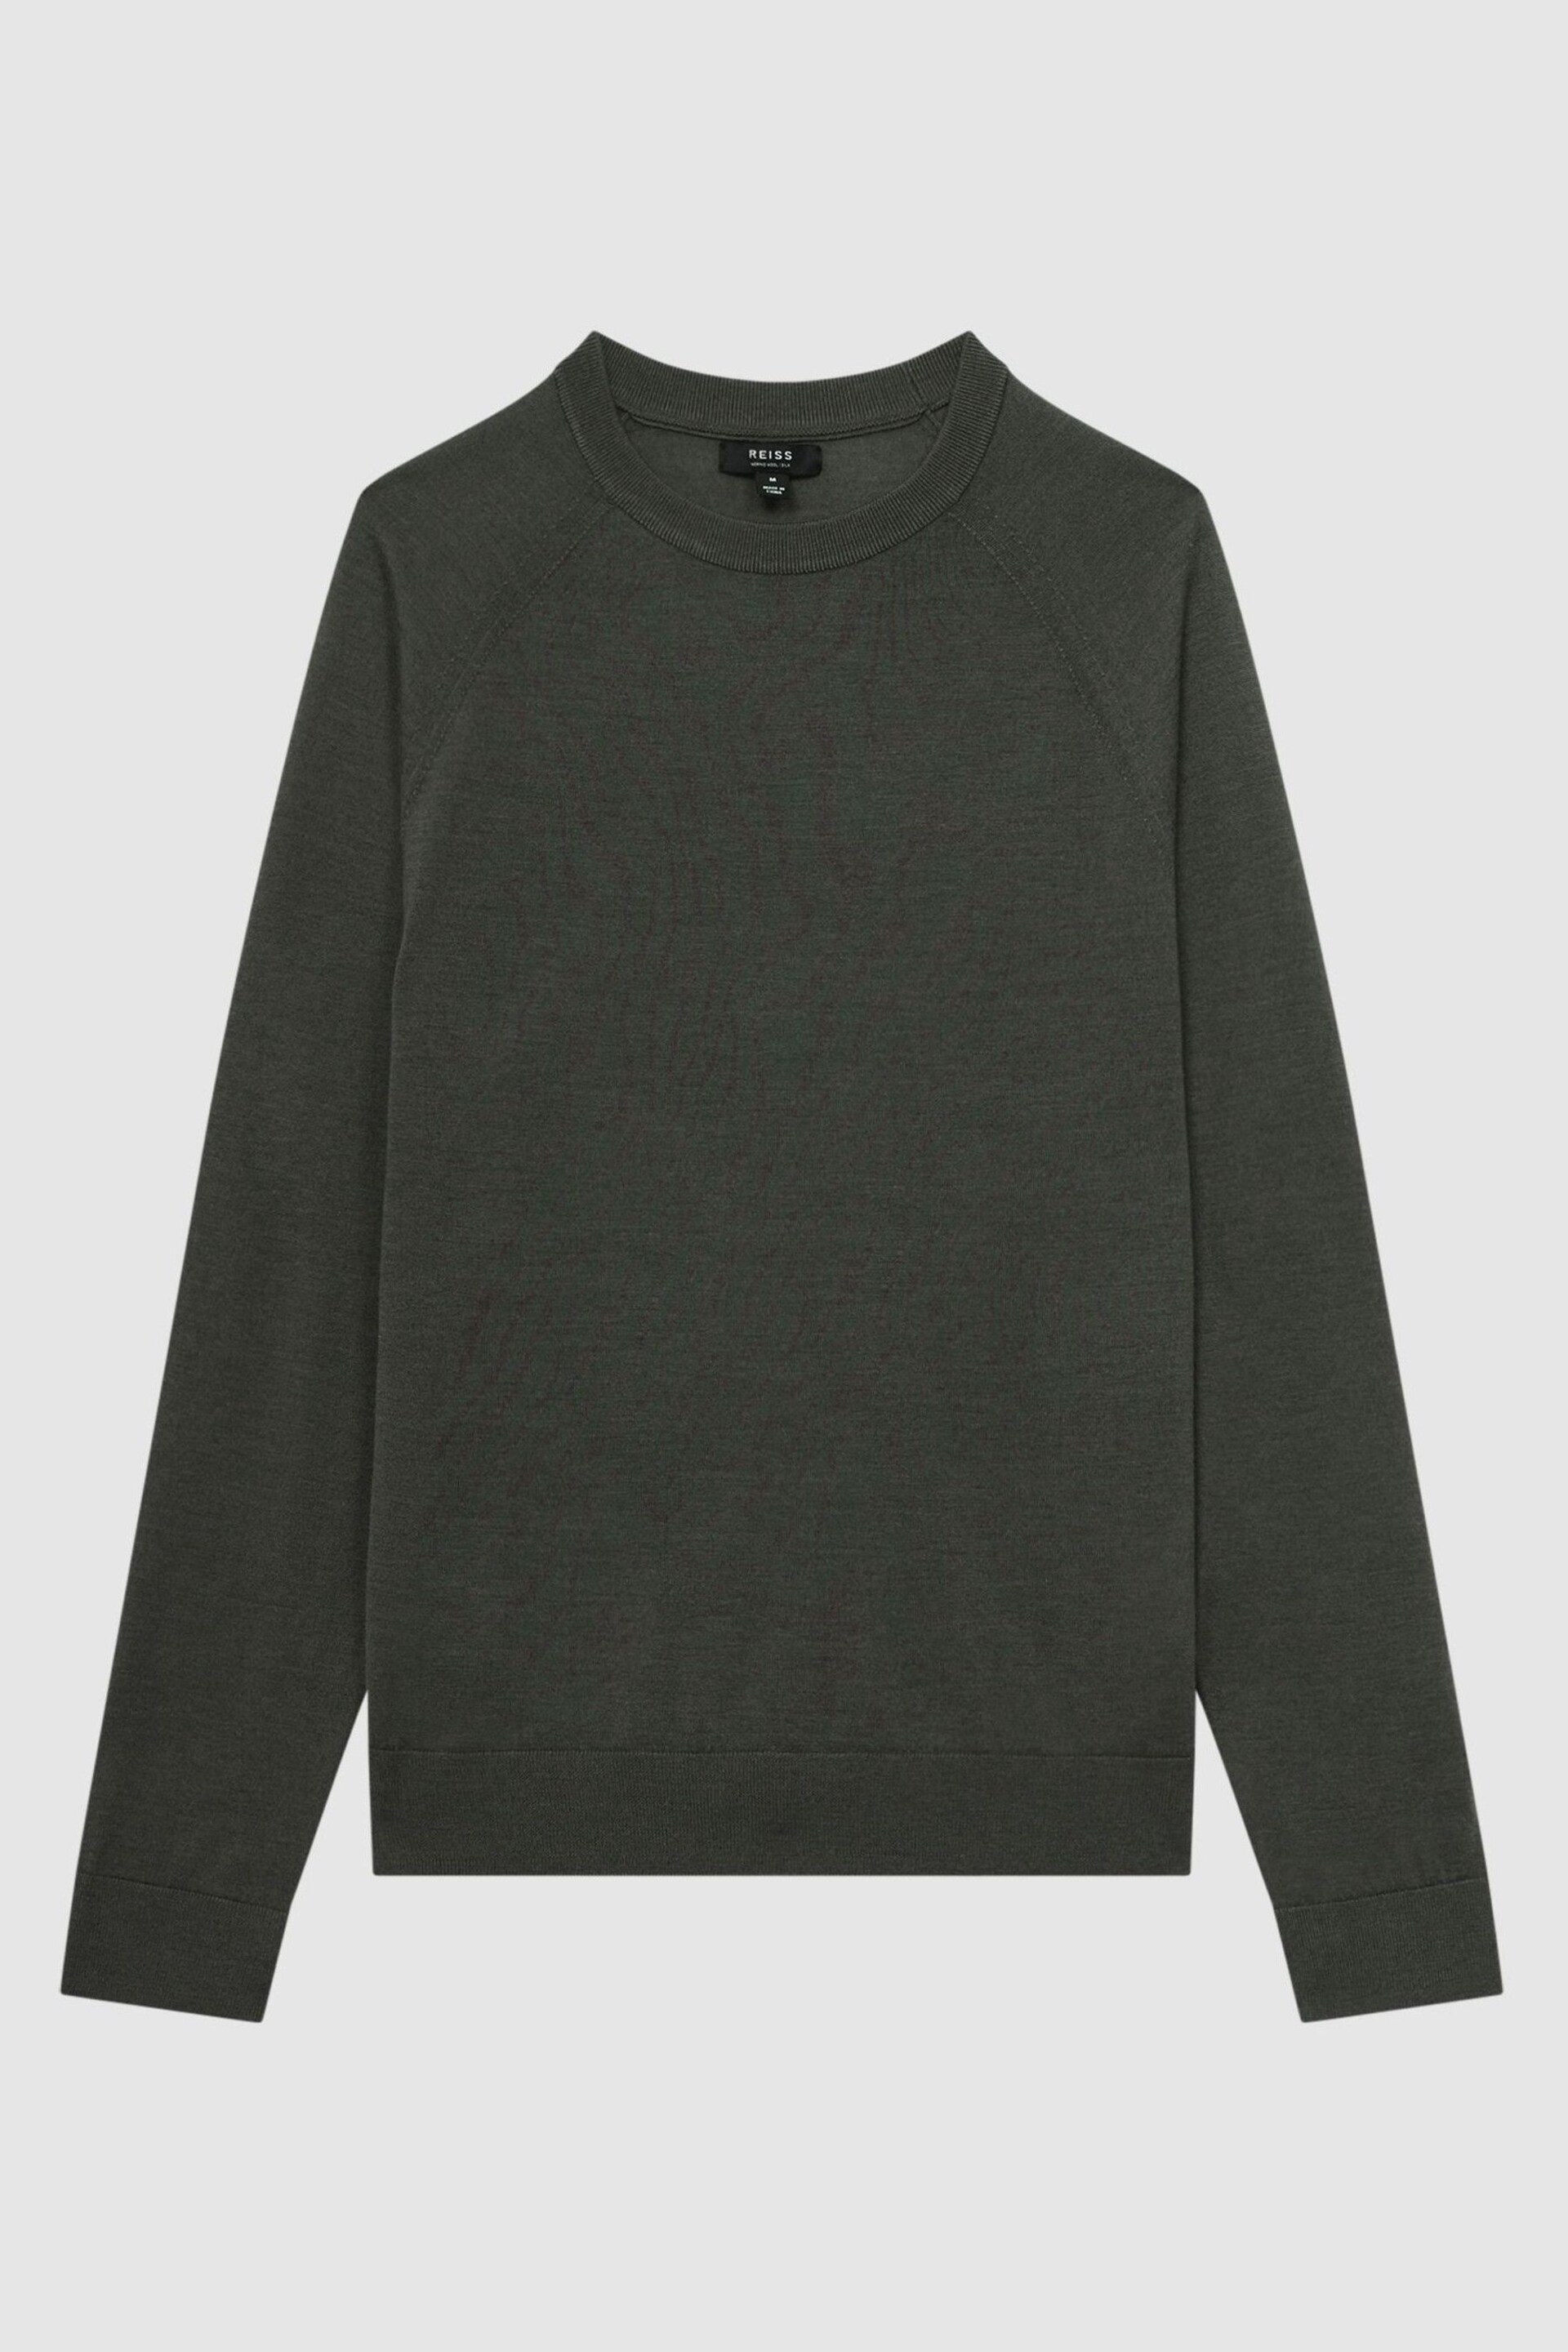 Reiss Sage Tinto Merino Silk Knitted Jumper - Image 2 of 6